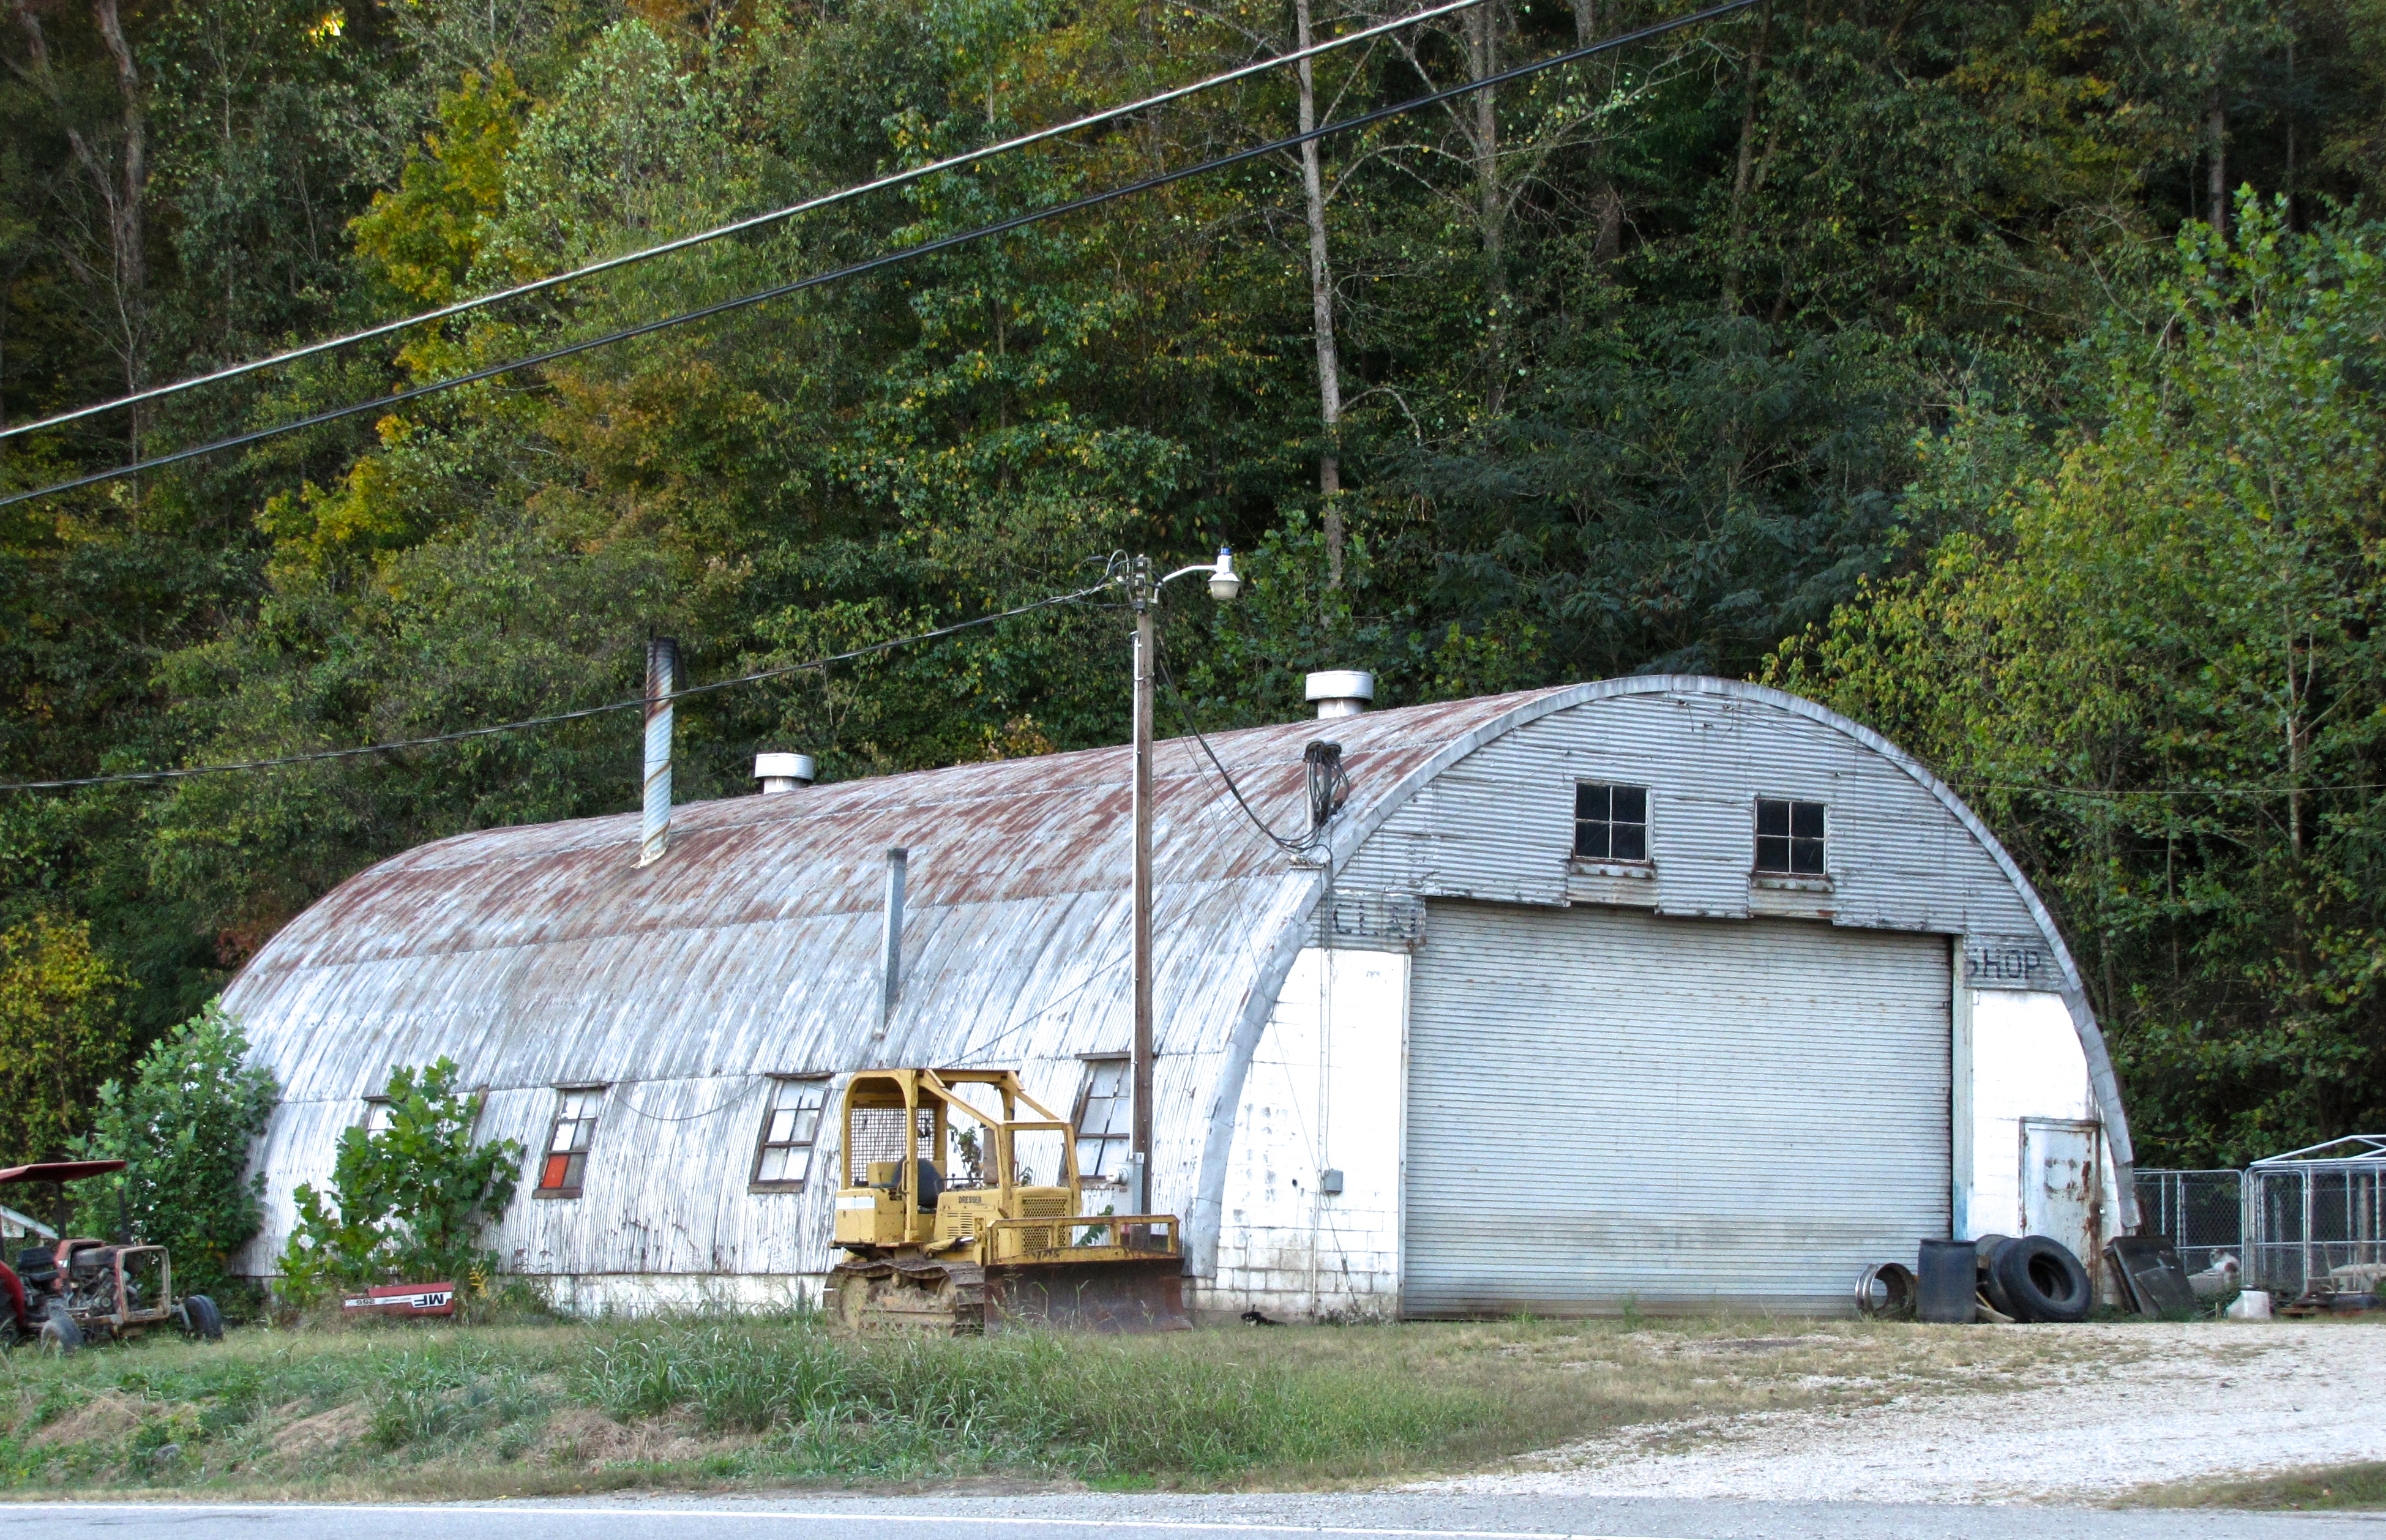 quonset hut in Kernersville, NC